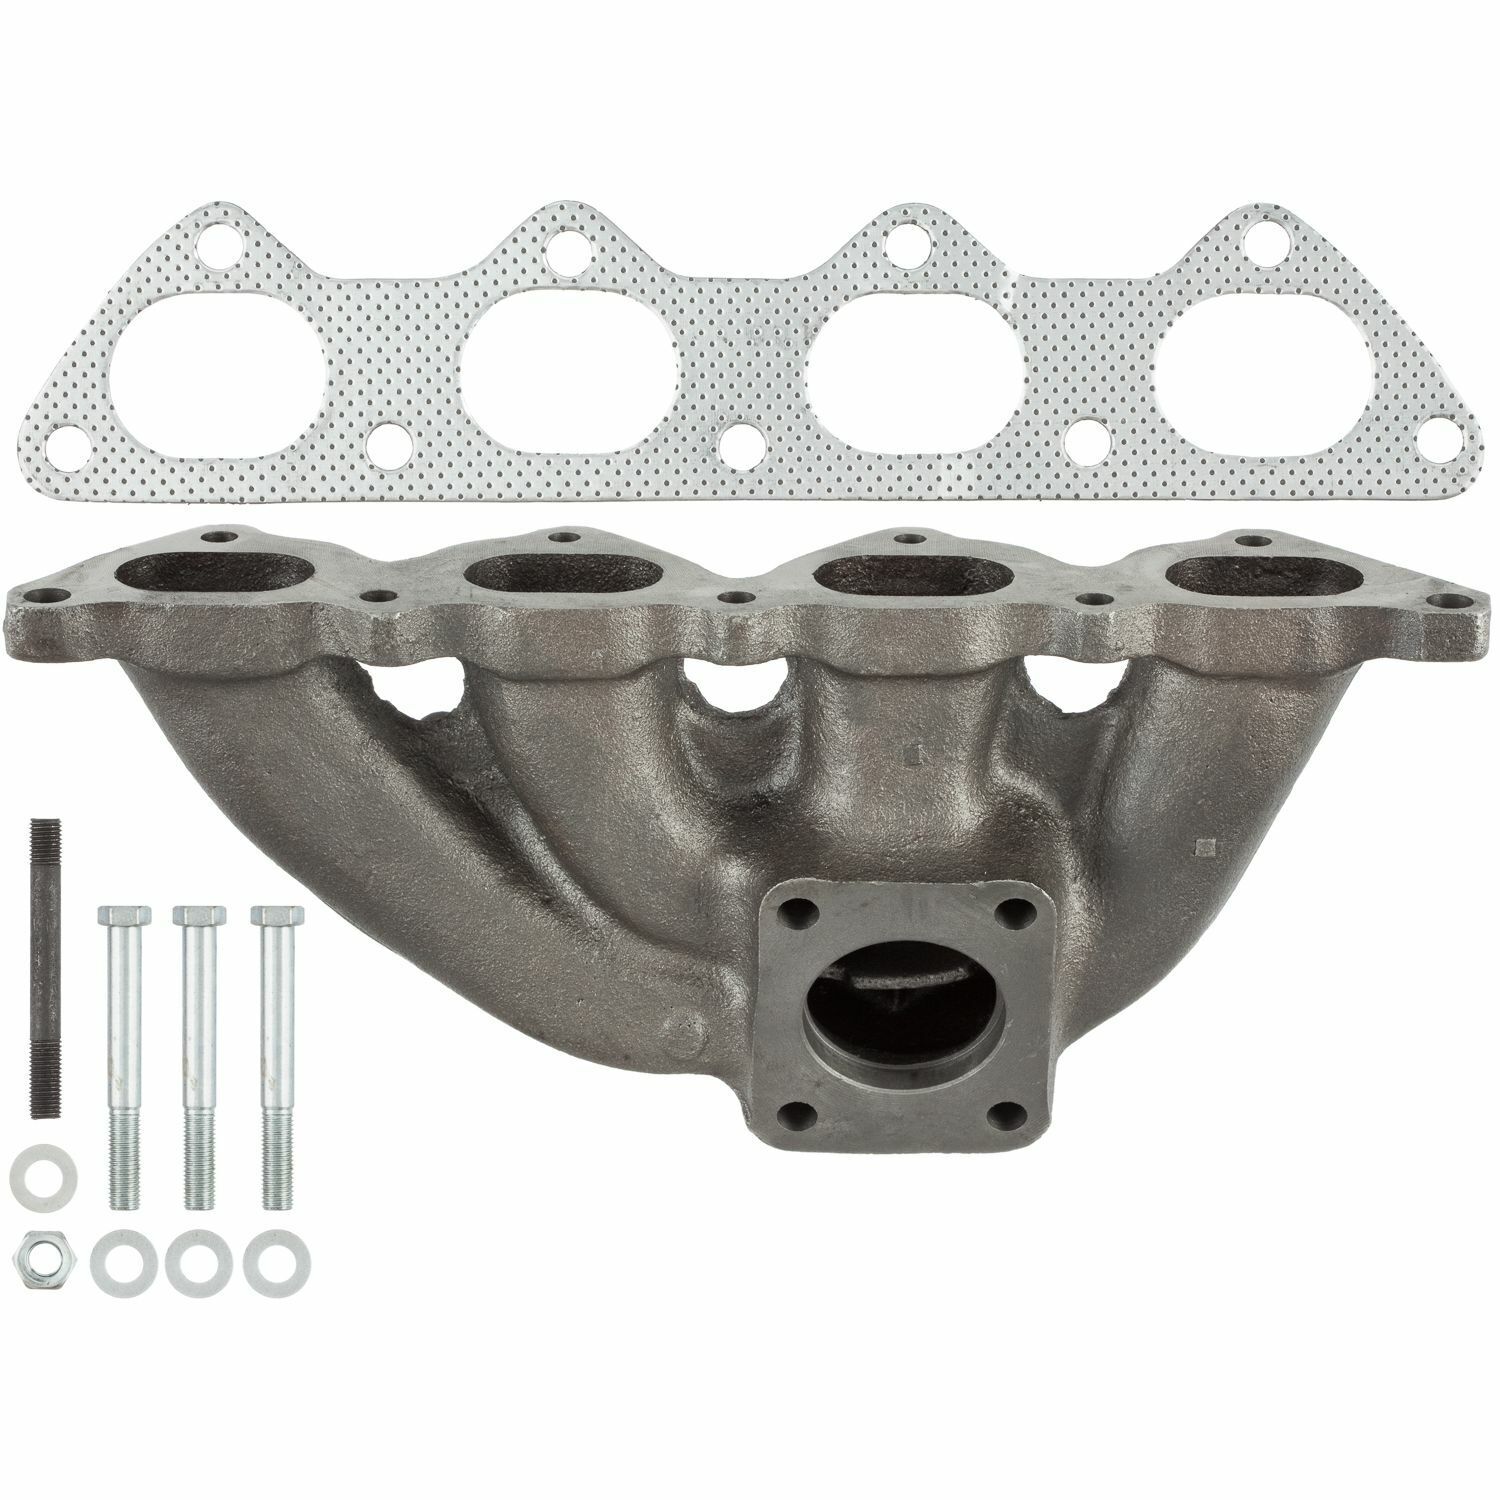 ATP 101138 Exhaust Manifold For 90-99 Eclipse Galant Laser Talon